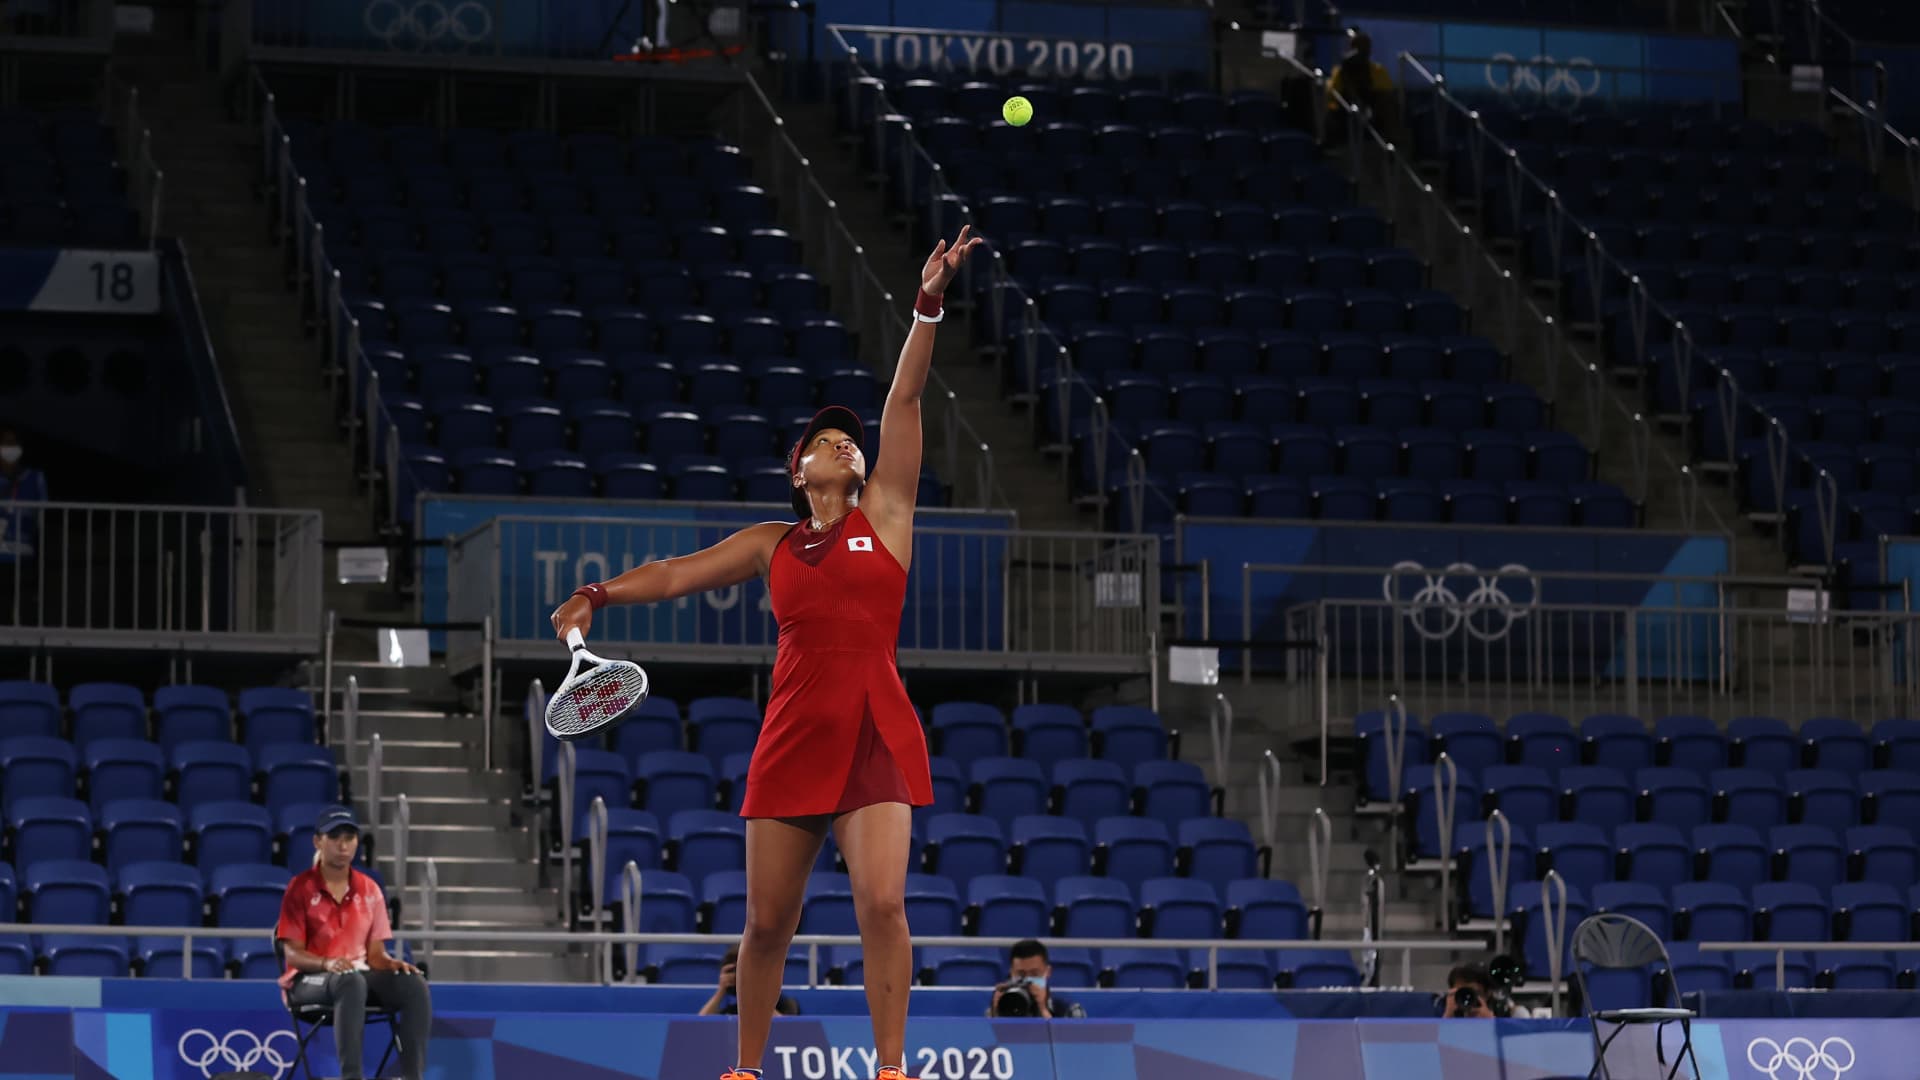 Naomi Osaka of Team Japan serves during her Women's Singles Third Round match against Marketa Vondrousova of Team Czech Republic on day four of the Tokyo 2020 Olympic Games at Ariake Tennis Park on July 27, 2021 in Tokyo, Japan.